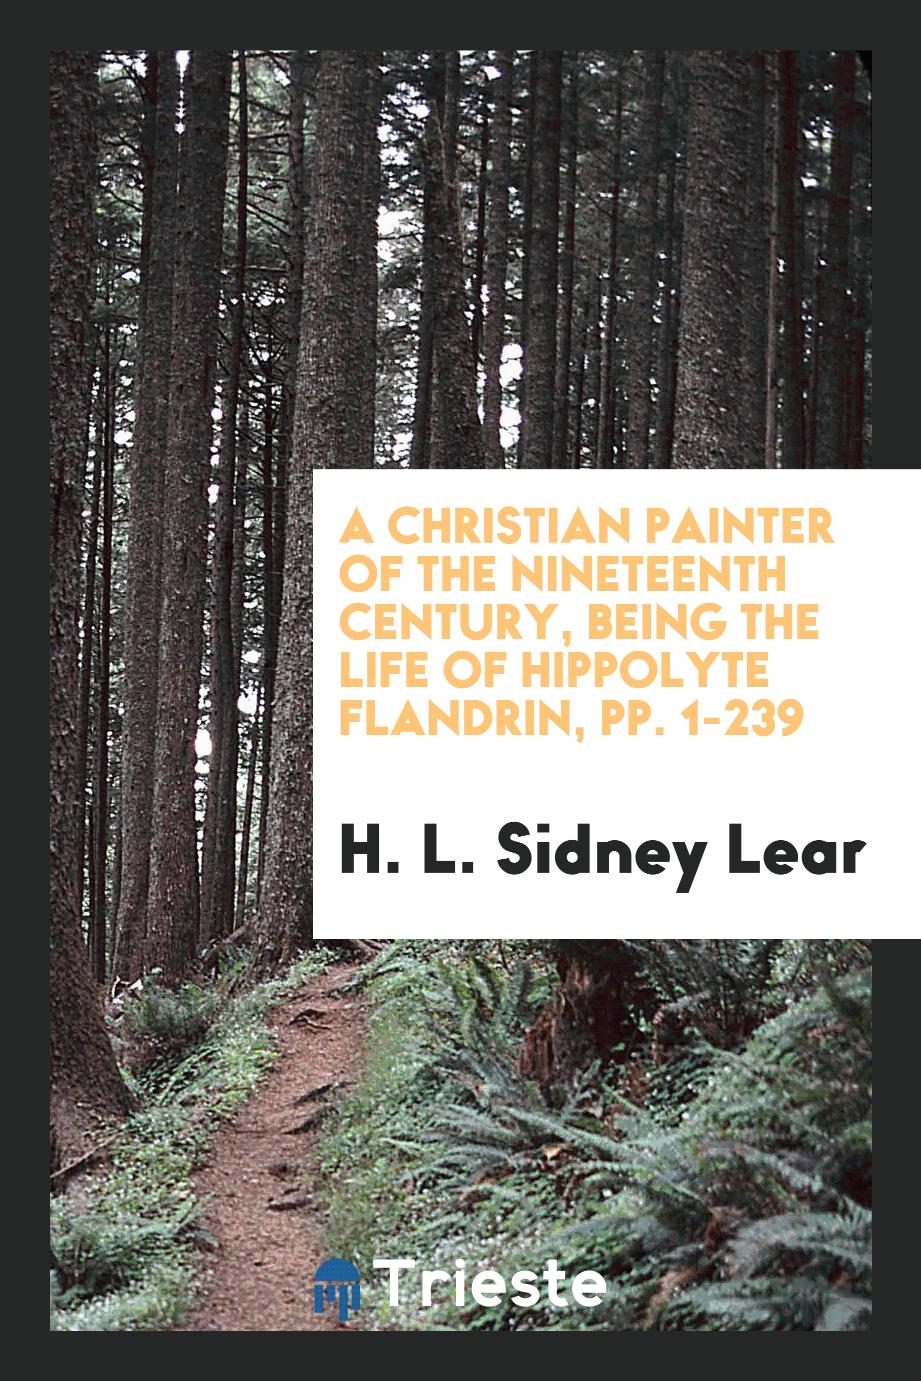 A Christian Painter of the Nineteenth Century, Being the Life of Hippolyte Flandrin, pp. 1-239